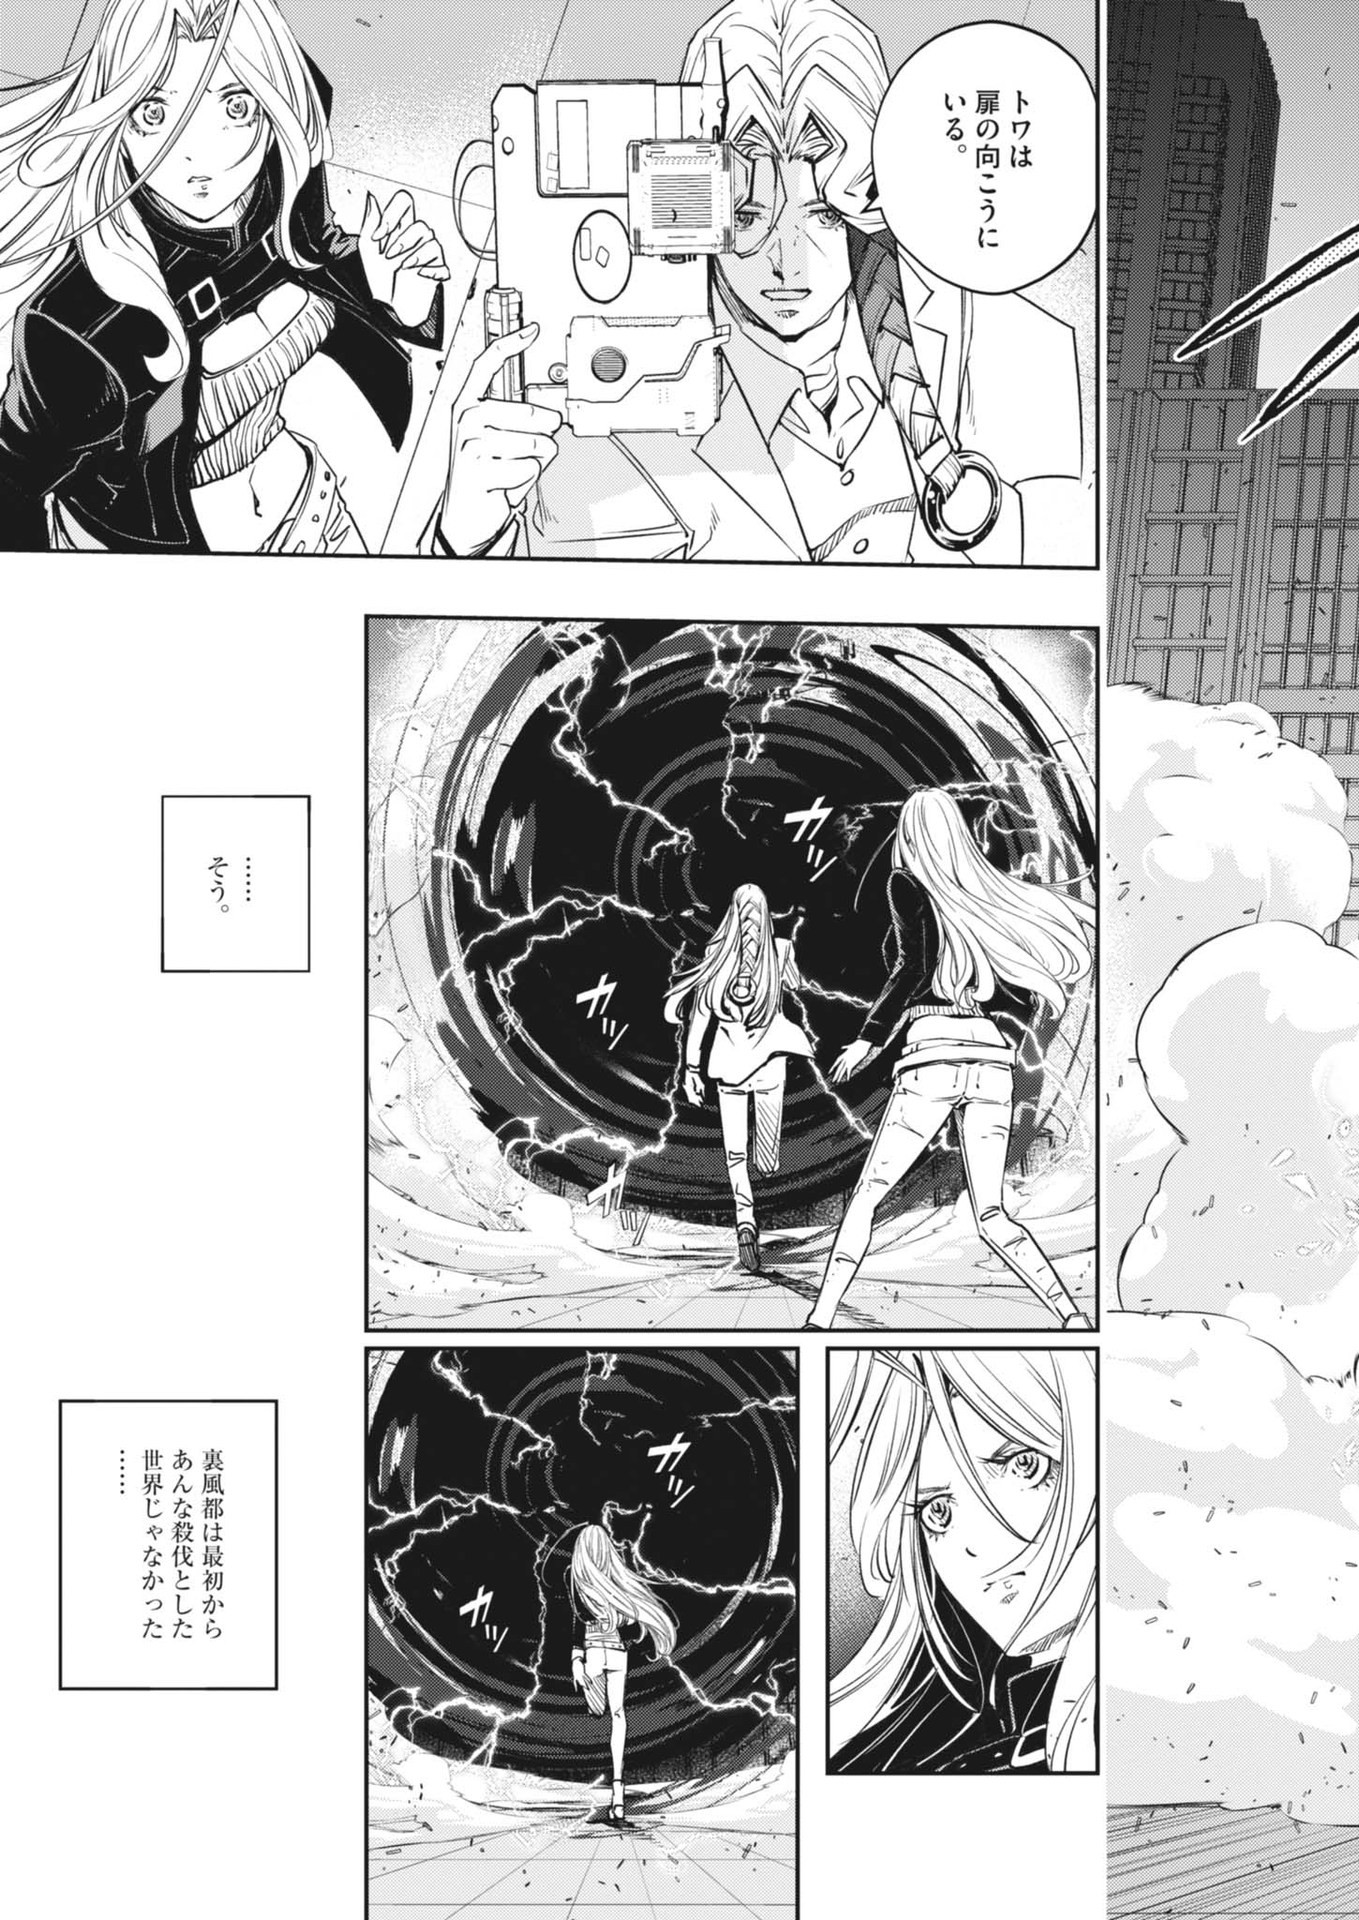 Kamen Rider W: Fuuto Tantei - Chapter 144 - Page 26